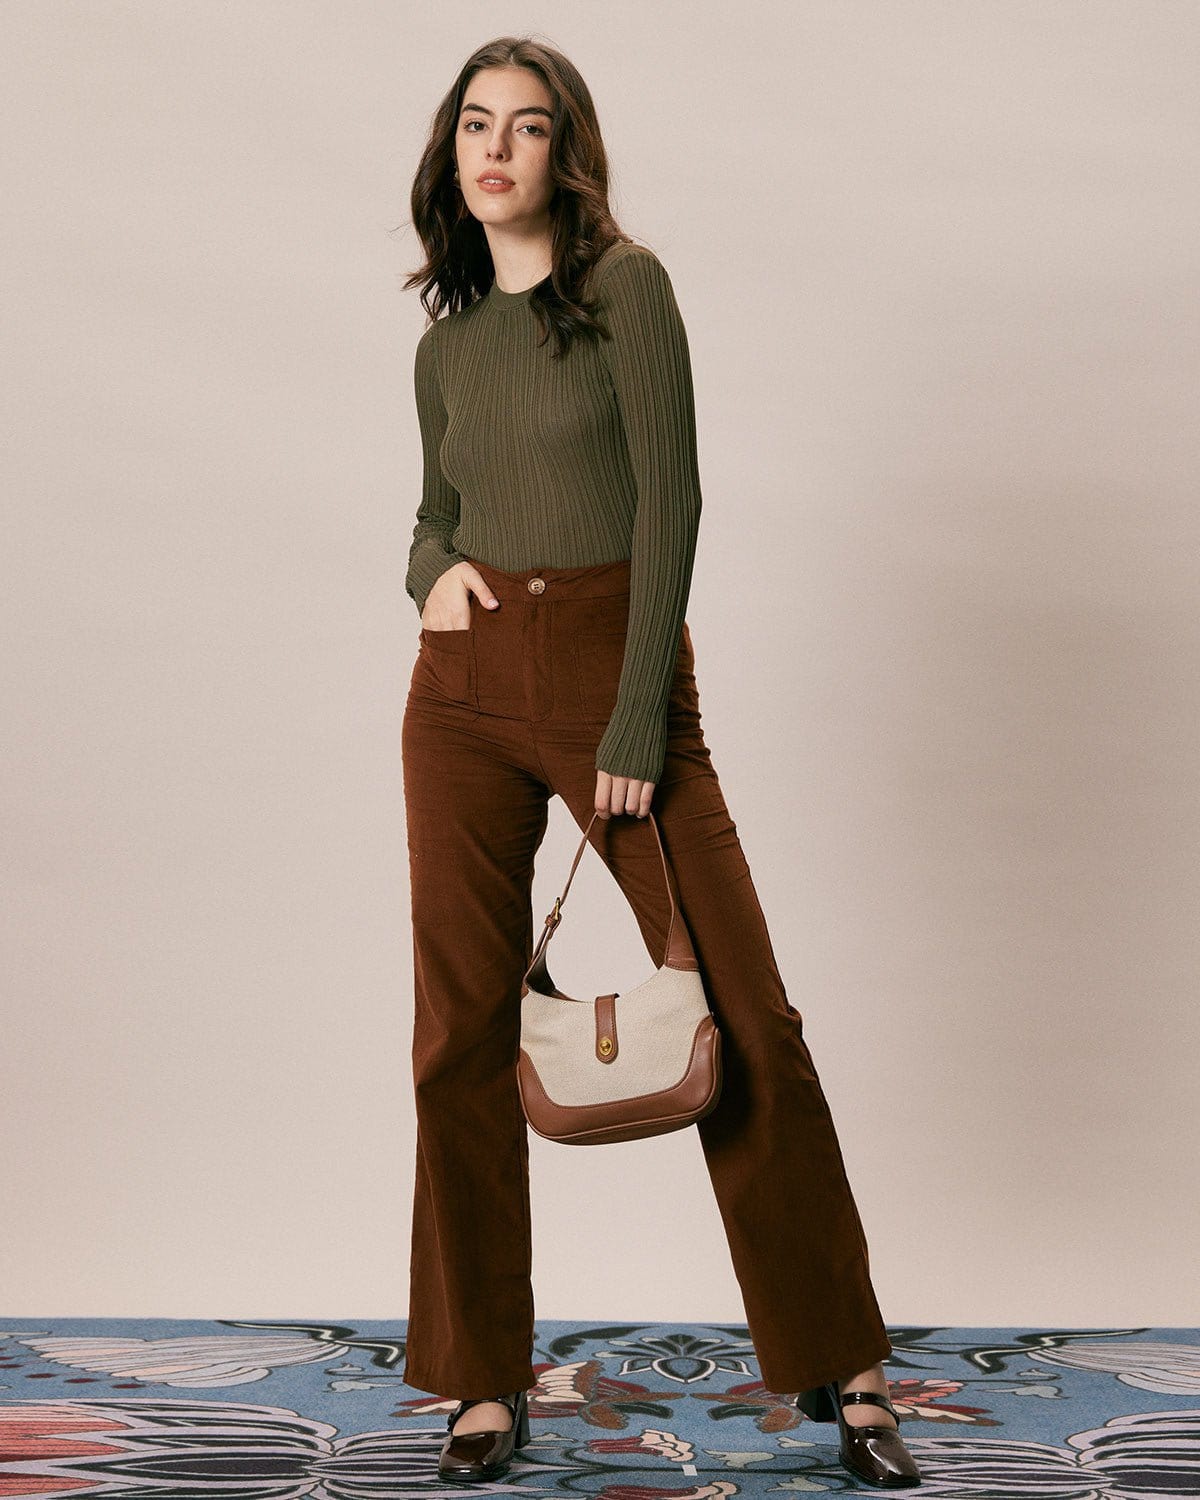 The Brown High Waisted Pockets Flare Pants